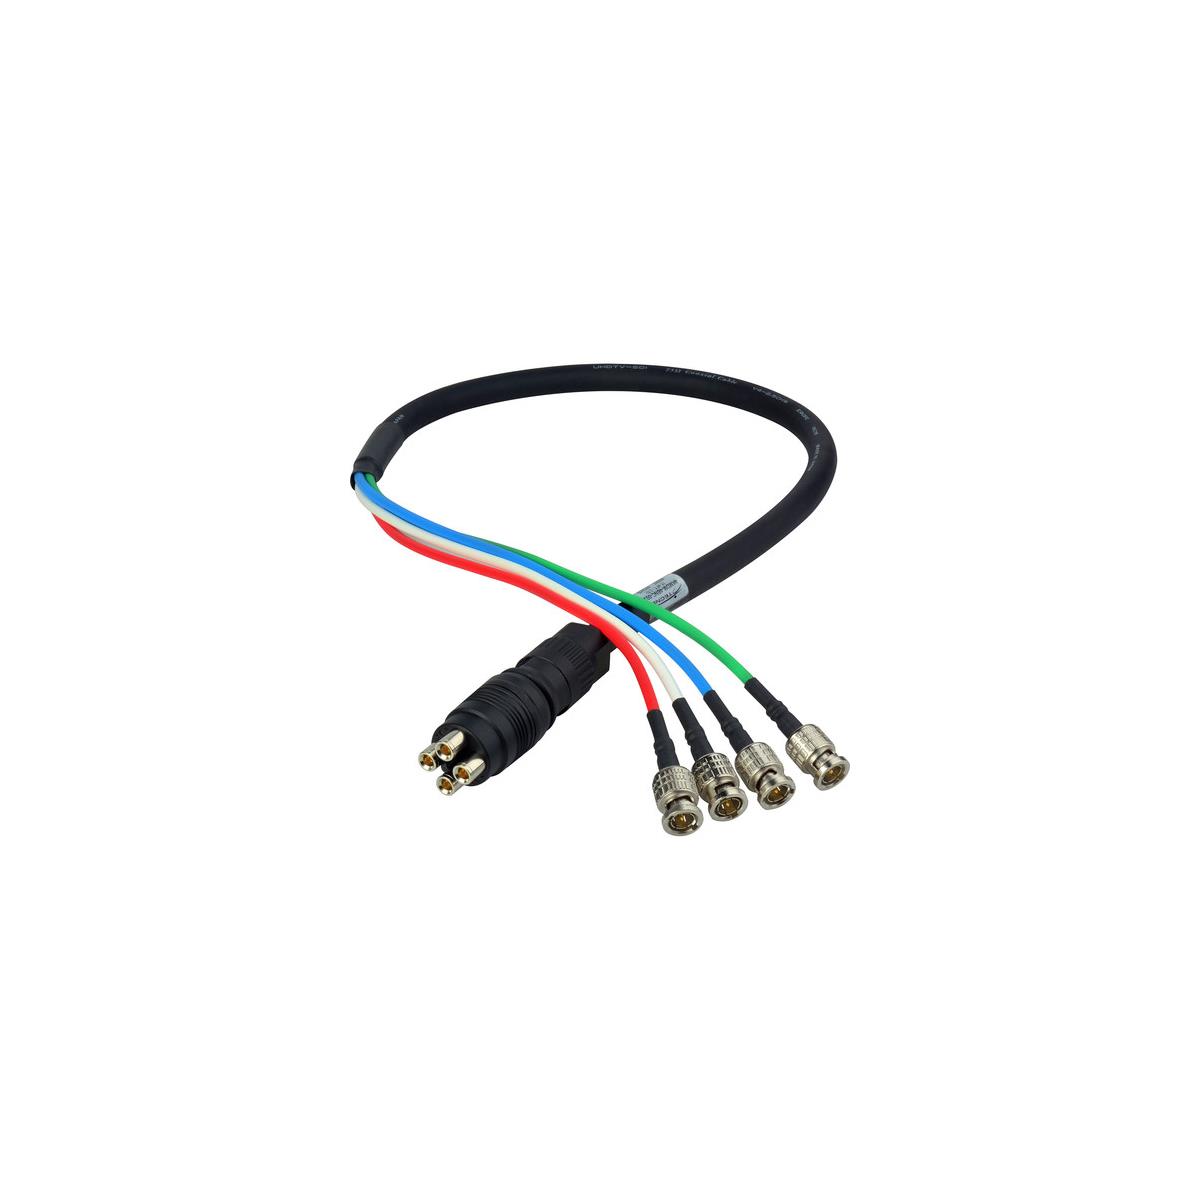 Laird 100' 4K UHD 3G HD-SDI 4-Channel DIN Male to BNC Camera Breakout Cable <b> 4-3G HD-SDI Signal Channel Quick Connect System for 4K/UHD Video Formats </b>One step, quick-connect Laird coax Canare cable assemblies connect 4 channels of 3G HD-SDI signals for 4K/UHD video formats. The Laird cables are assembled with Canare 4 channel, V4-2.5CHW flexible coaxial cable, allowing a break out to 4 Canare BNC or 4 DIN connectors. The Canare male connector, MDM-V4C25HW is designed to mate with the MDF-V4JRU panel mount receptacle which features a 4 DIN pass-through on the back side to increase your connectivity but not your rack space. Laird 4K UHD Canare camera cables assemblies make quick work of keeping everything in line and organized. Available in a variety of lengths. Use with the Canare MDF-V4JRU 4K DIN 1.0/2.3 4-channel chassis mount connector.• Quick connect and disconnect• Multiple 3G-SDI signals to 4K/UHD formats• Canare cable with solid and lightweight nylon resin body• Push-pull locking Canare coax connectors with protective rubber boots• High performance Canare BCP-B25HW BNC or 4 DCP-C25HD DIN connectors• Made in the USA in a Canare trained fiber shop• Canare V4-2.5CHW 4-Channel 4K 75Ohms Coaxial Cable• 4 DIN 1.0/2.3 connectors• MDF-V4JRU accepts MDM-V4C25HW and also DIN 1.0/2.3 plugs<b> Applications </b>• High density 3G-SDI• applications• Mobile trucks• Fly packs• Studios• 4K transmission• Consolidate HD-SDI lines